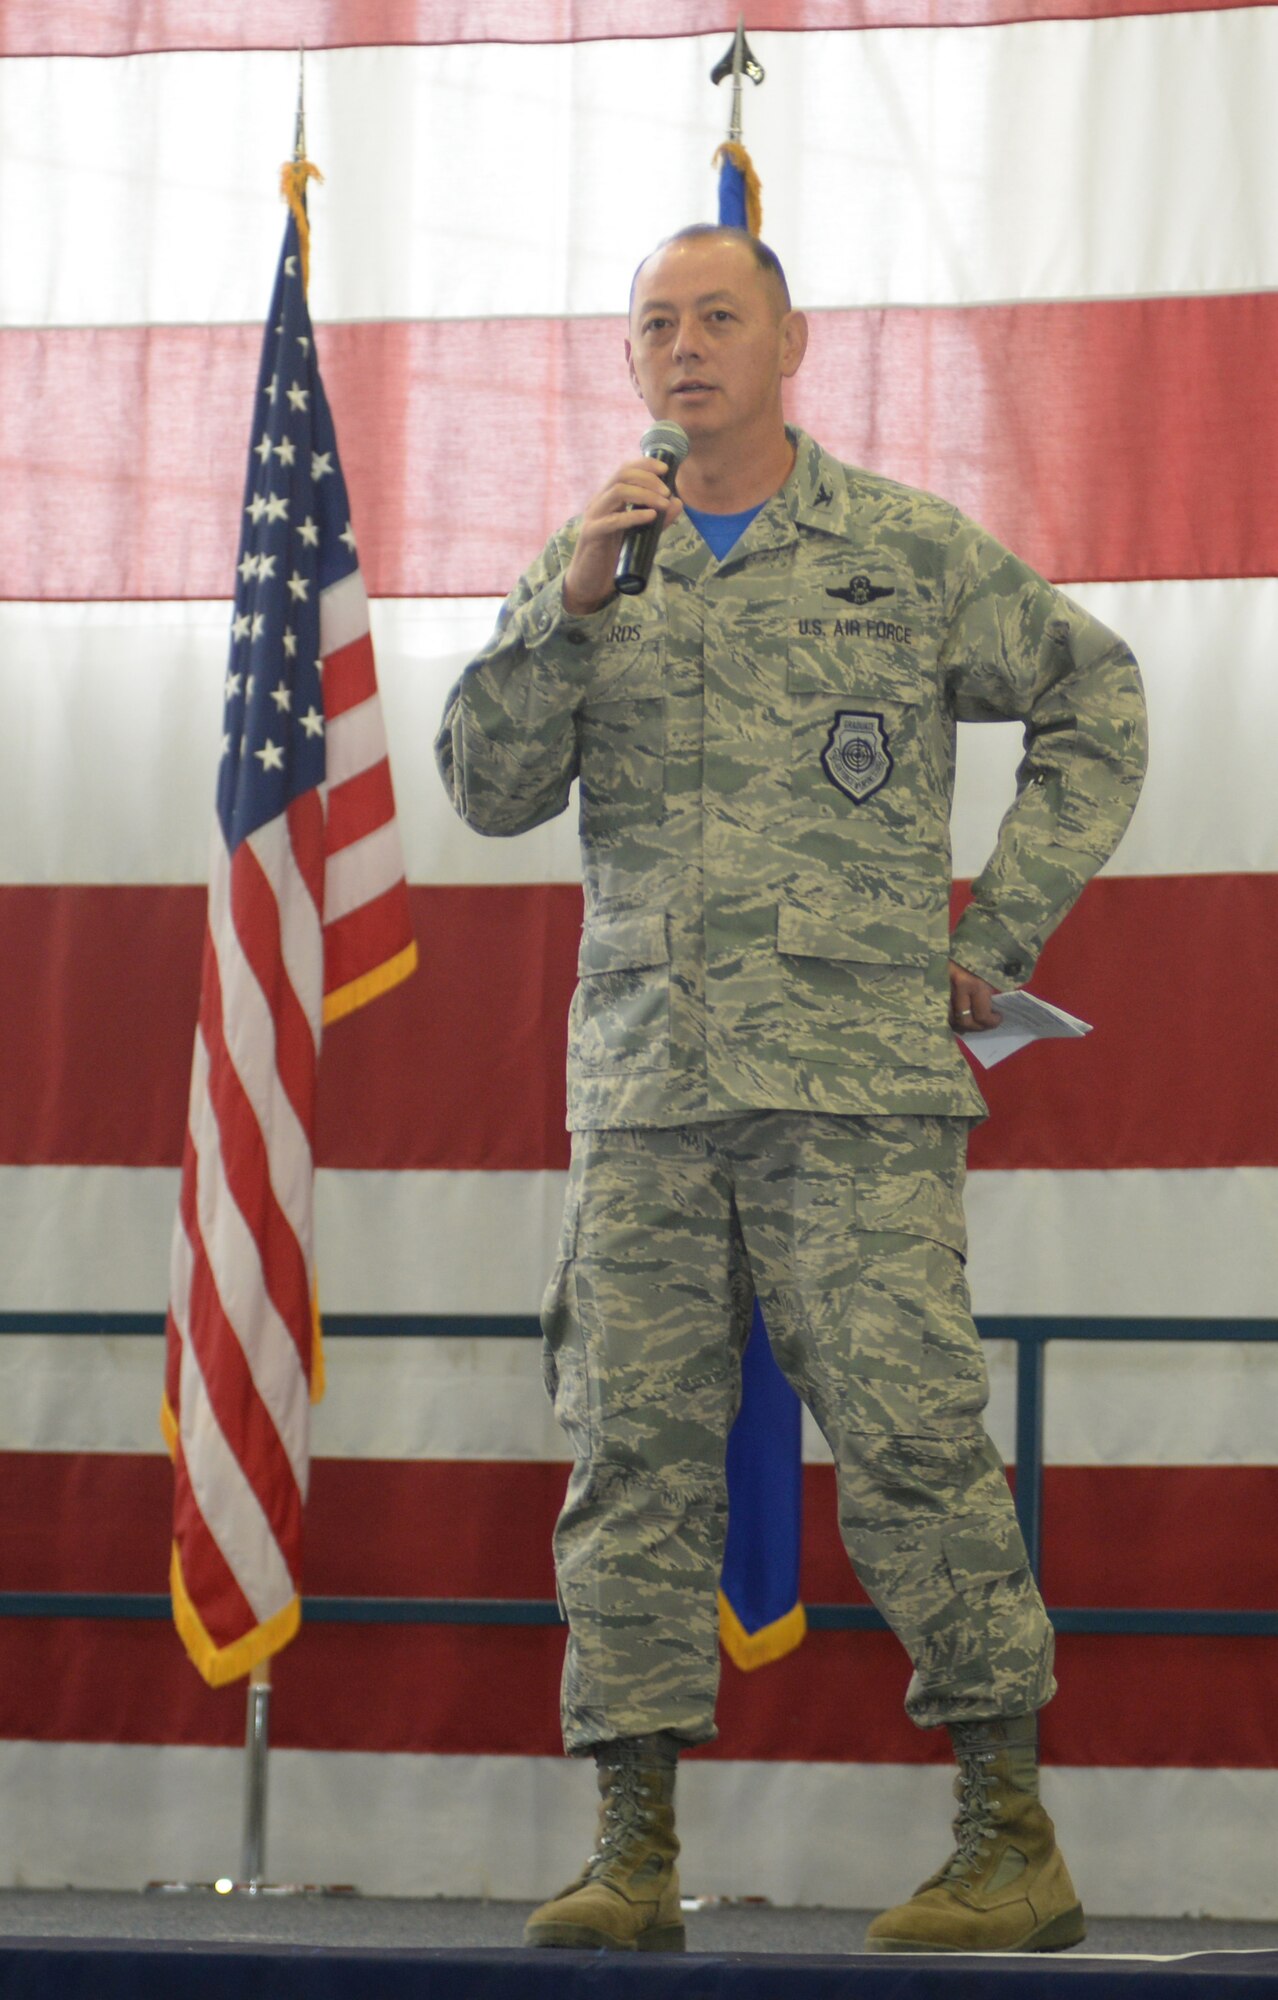 Col. Edwards, the 28th Bomb Wing Commander, delivers a speech to Airmen during Wingmen Day Aug. 25, 2017 on Ellsworth Air Force Base, S.D. The Wing Commanders All Call and kicked off the day’s events which included lectures and a base picnic called the Summer Bash. (U.S. Air Force photo by Airman 1st Class Thomas Karol)